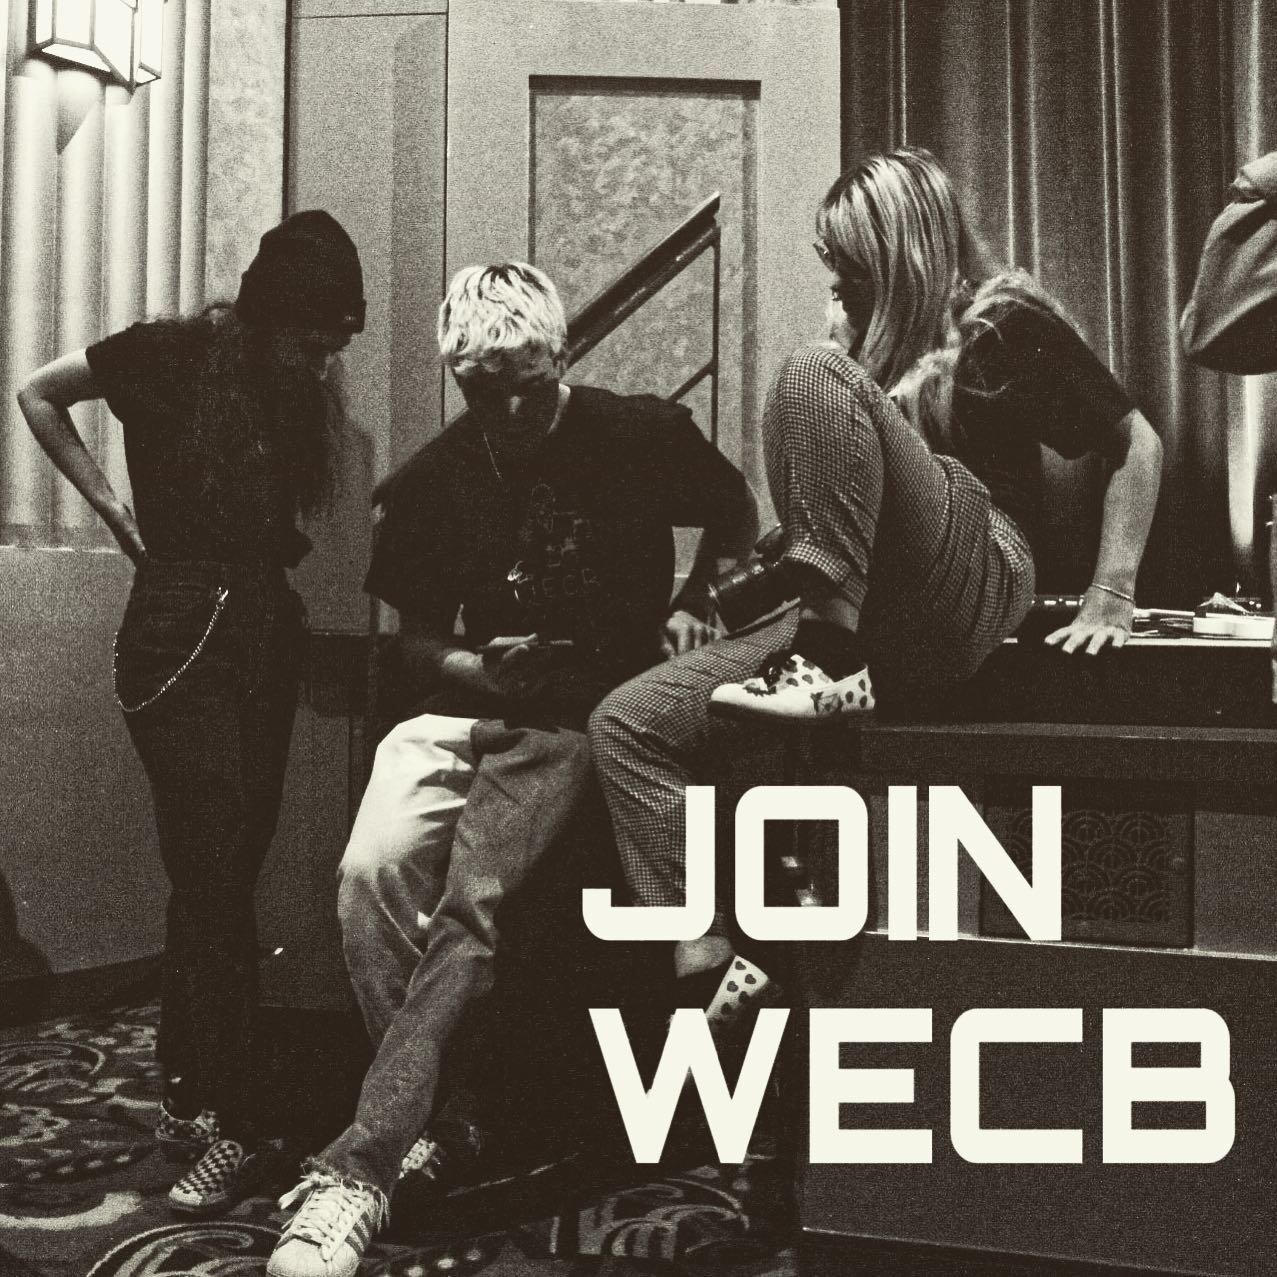 Come see us at the mid-mid semester Org Fair! This Friday 3-5pm EST! Join us to learn about our teams including Audio, @milkcrate.wecb, Live!, Marketing, and Programming! Links can be found on EmConnect :)

Photograph from Diet Cig live show hosted by WECB Live!